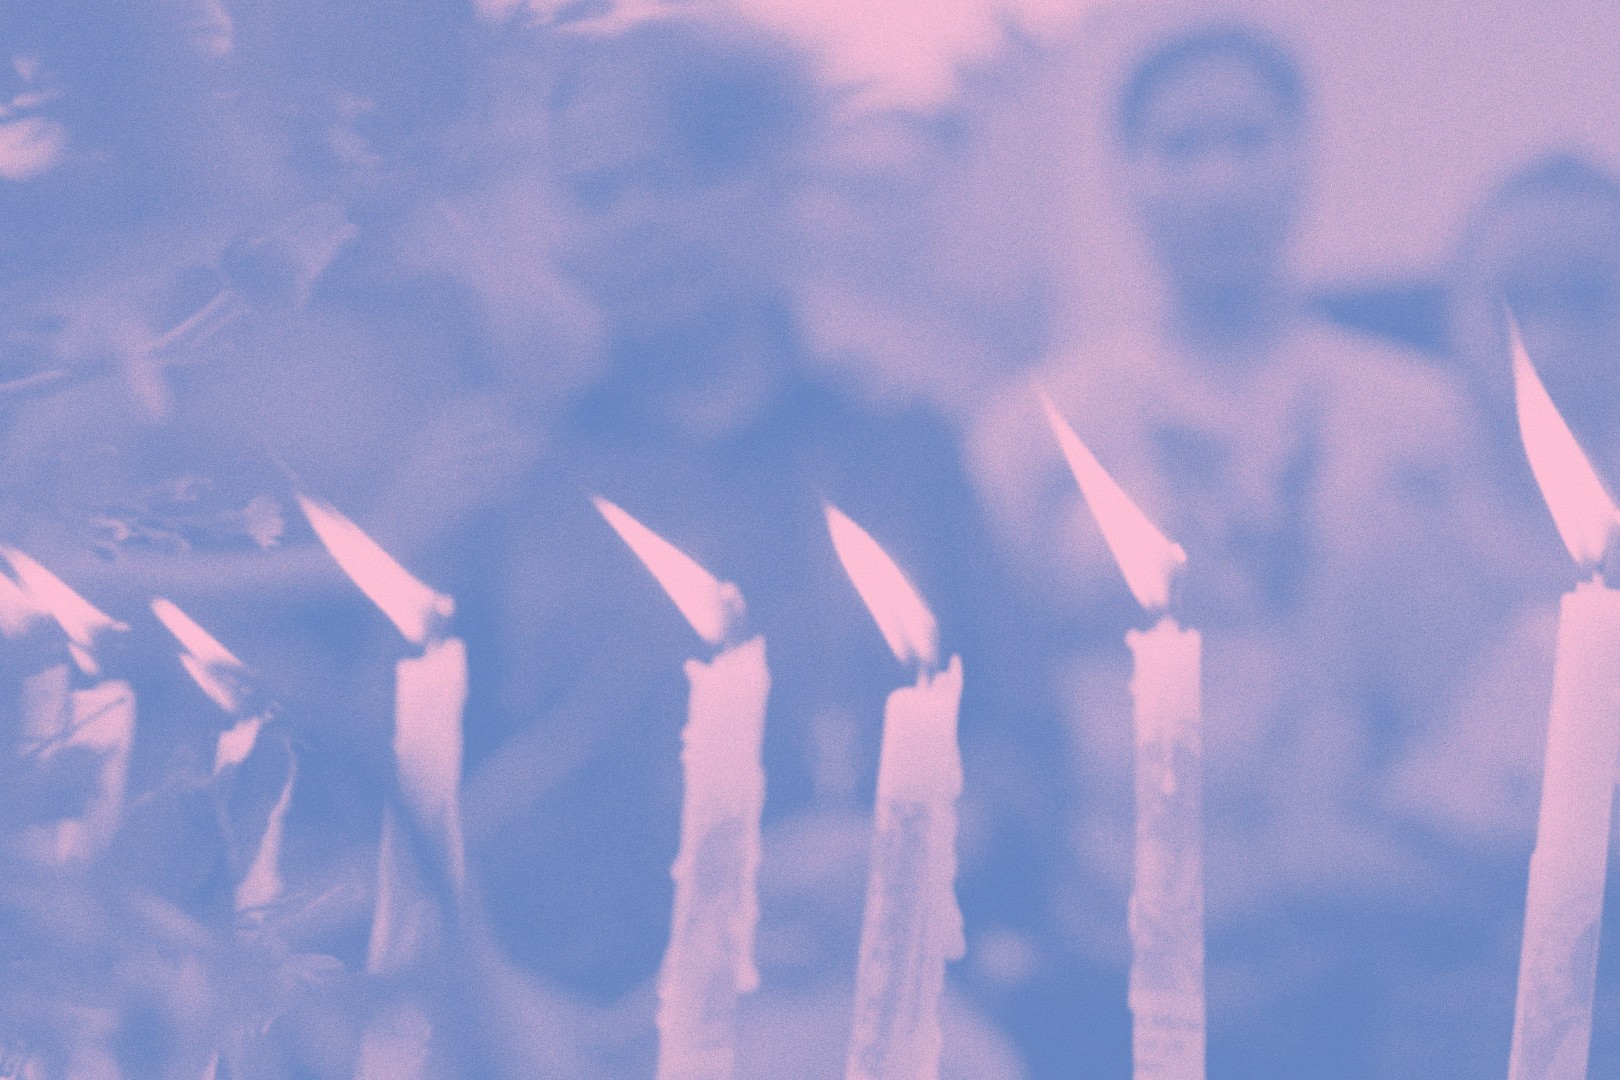 An image of lit candles in the foreground, people in the background. The image is awash in pink and blue gradients.